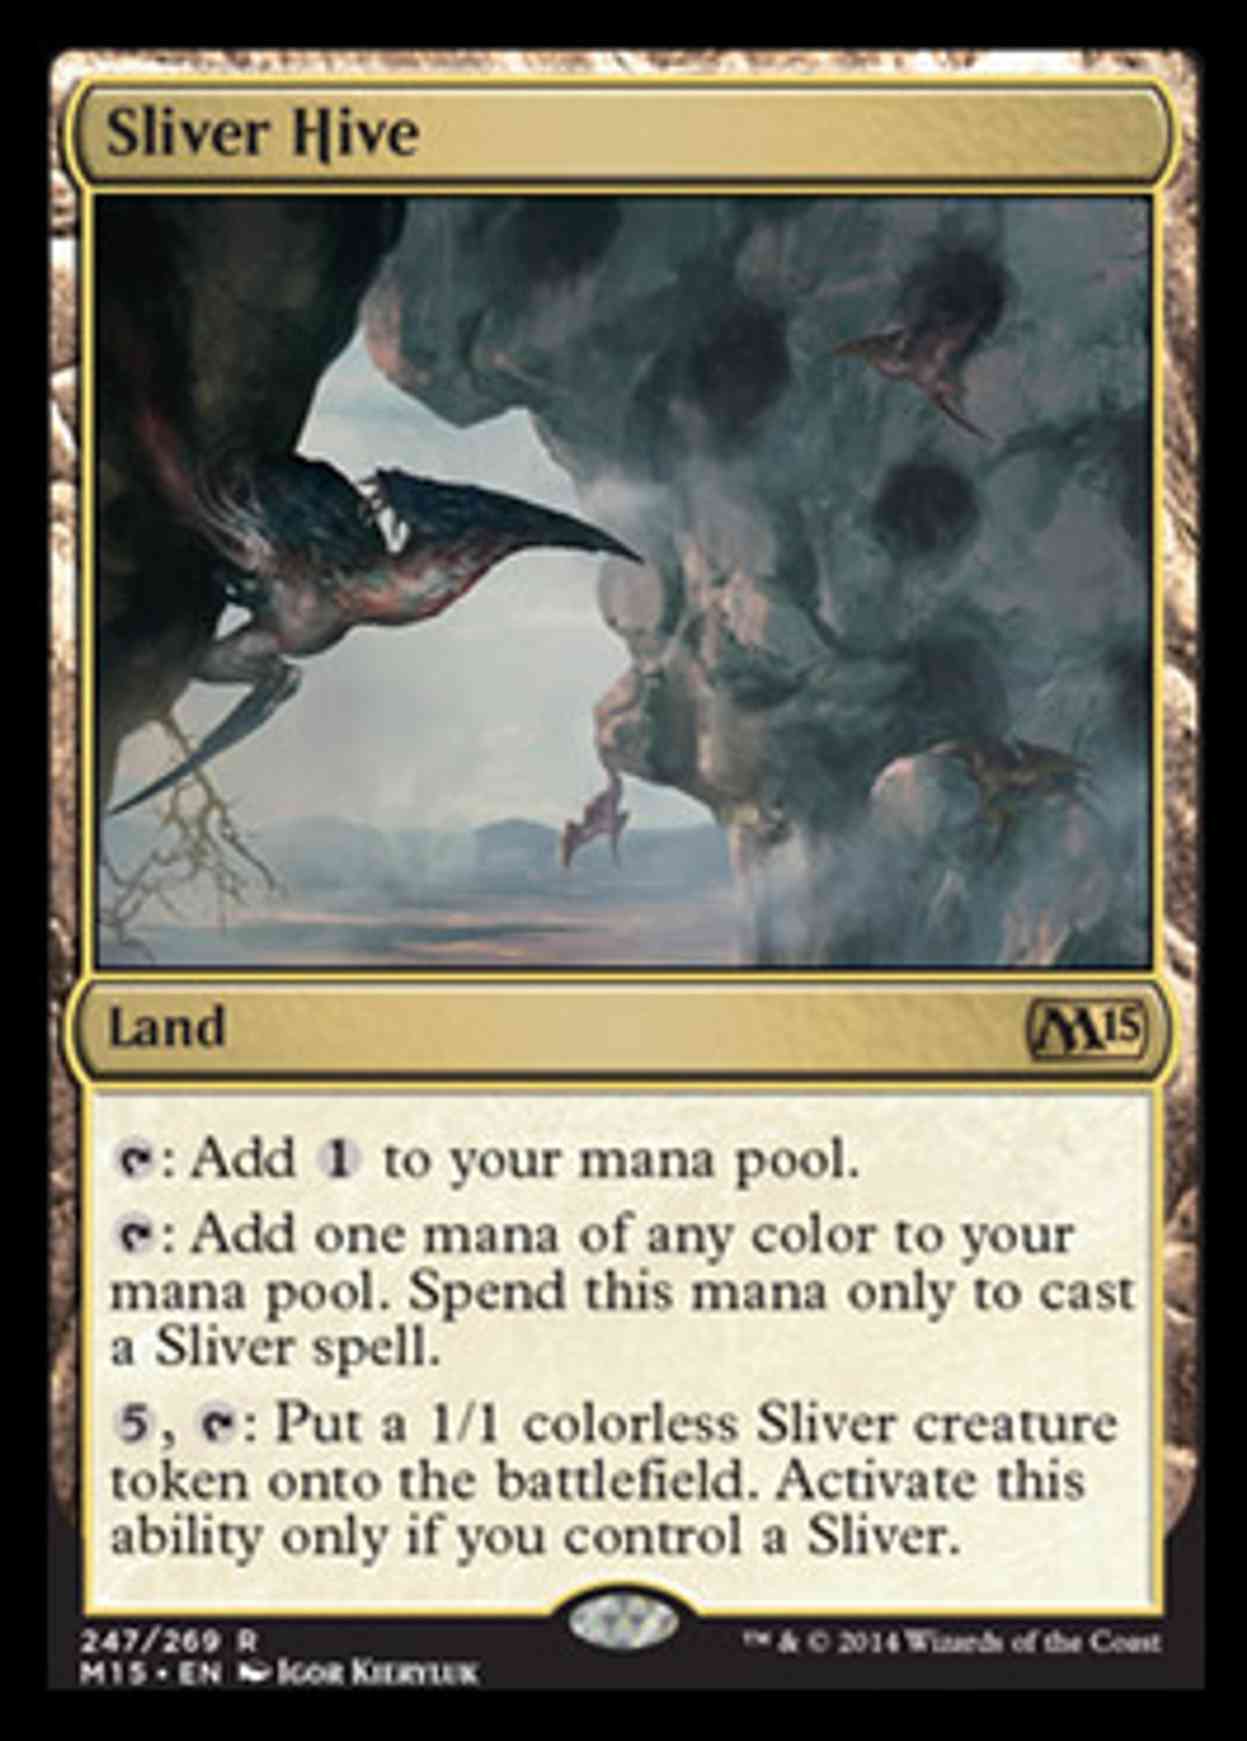 Sliver Hive magic card front